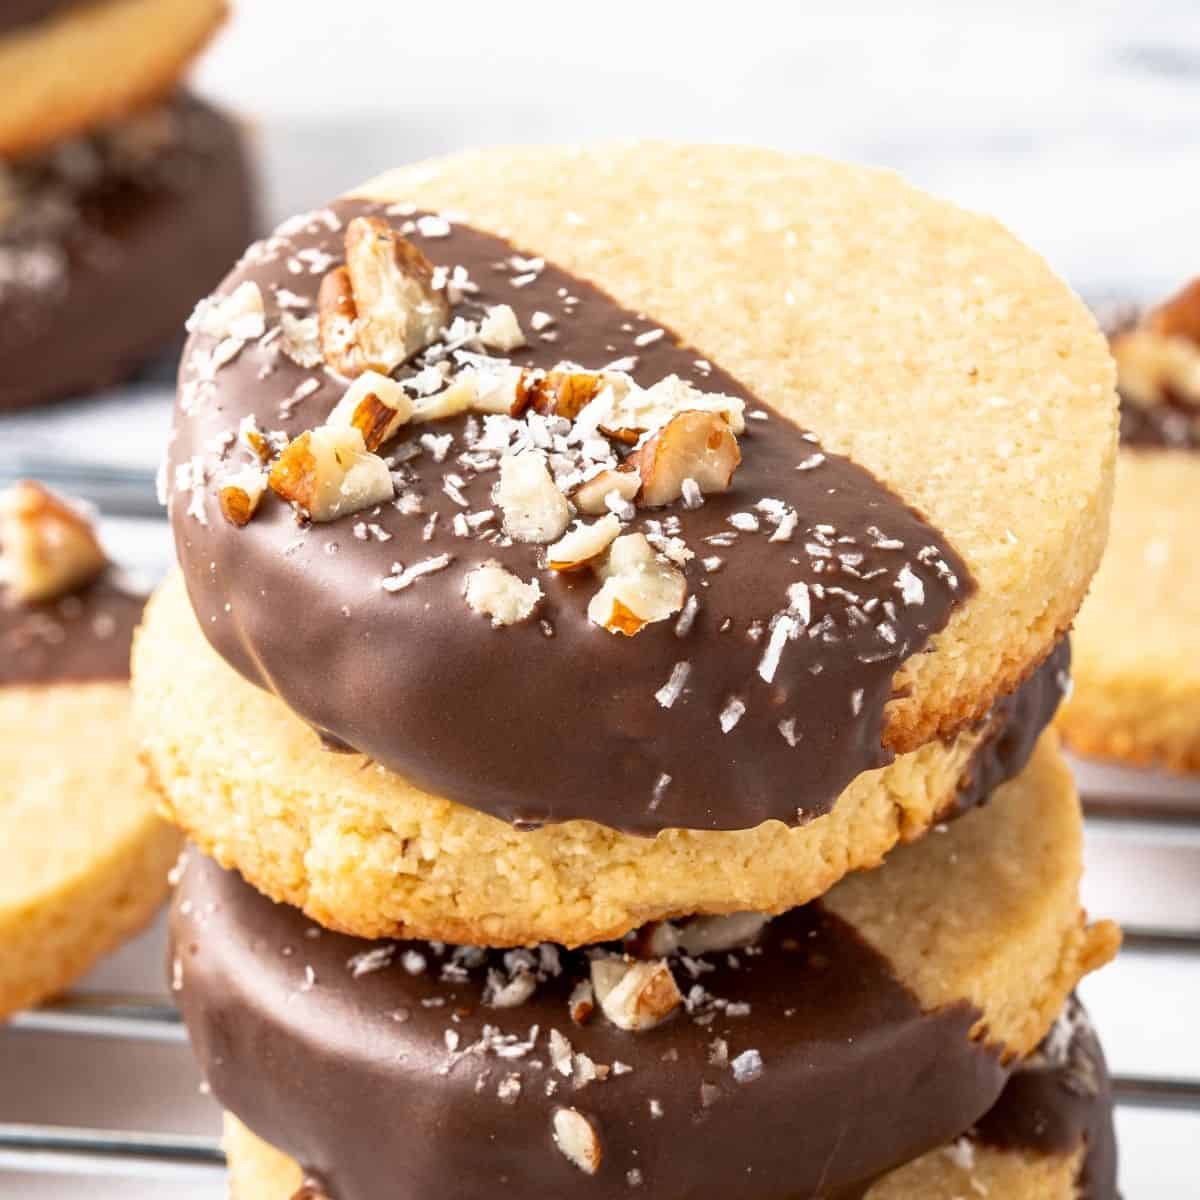 Sugar Free Shortbread Cookies, a simple dessert or snack recipe for buttery and crumbly cookies made with no added sugar. keto LC Option.